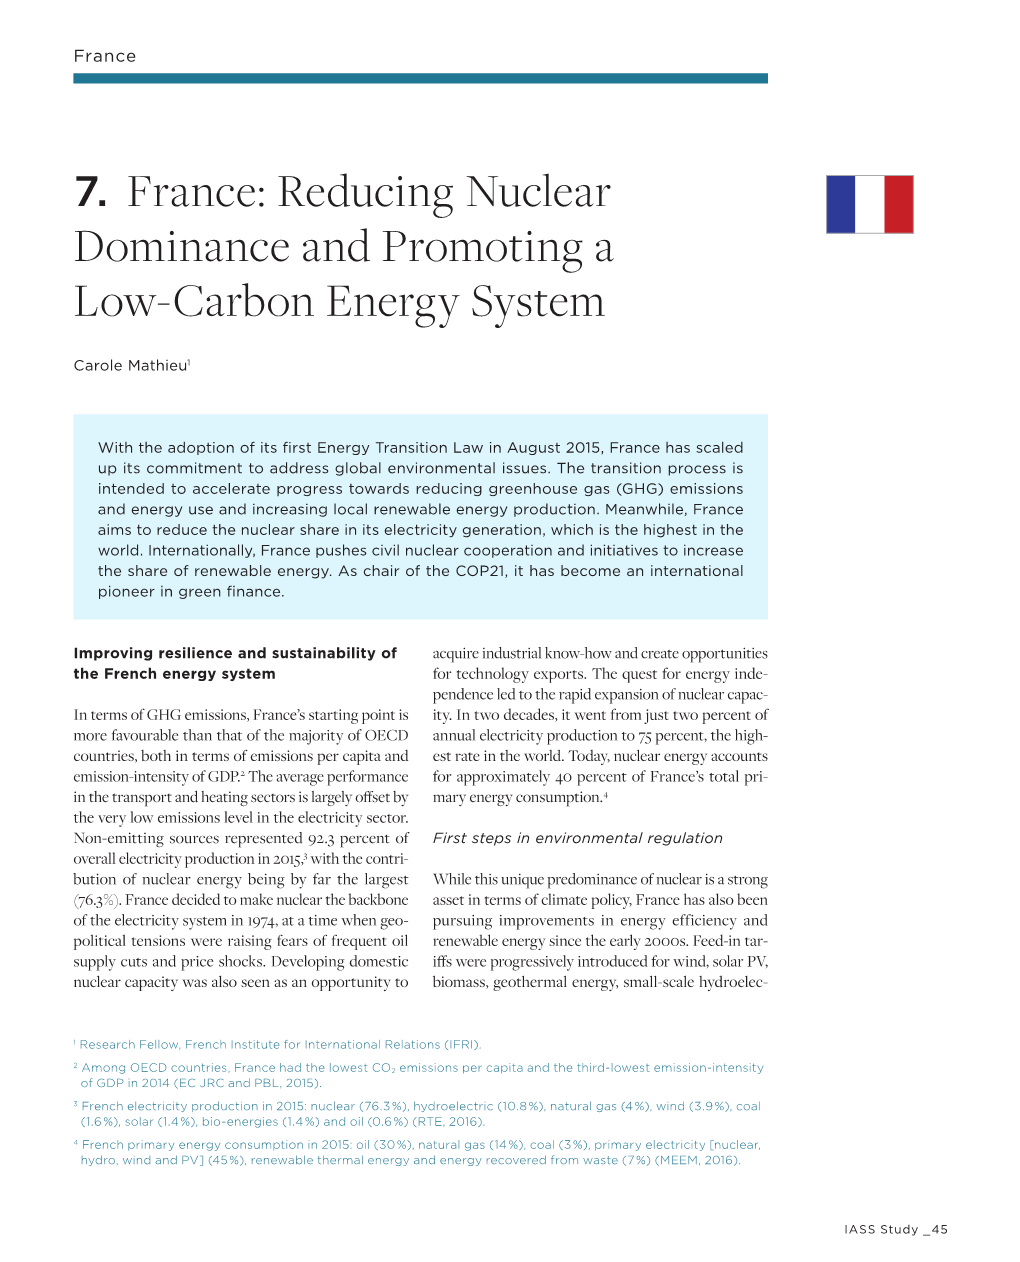 Dominance and Promoting a Low-Carbon Energy System